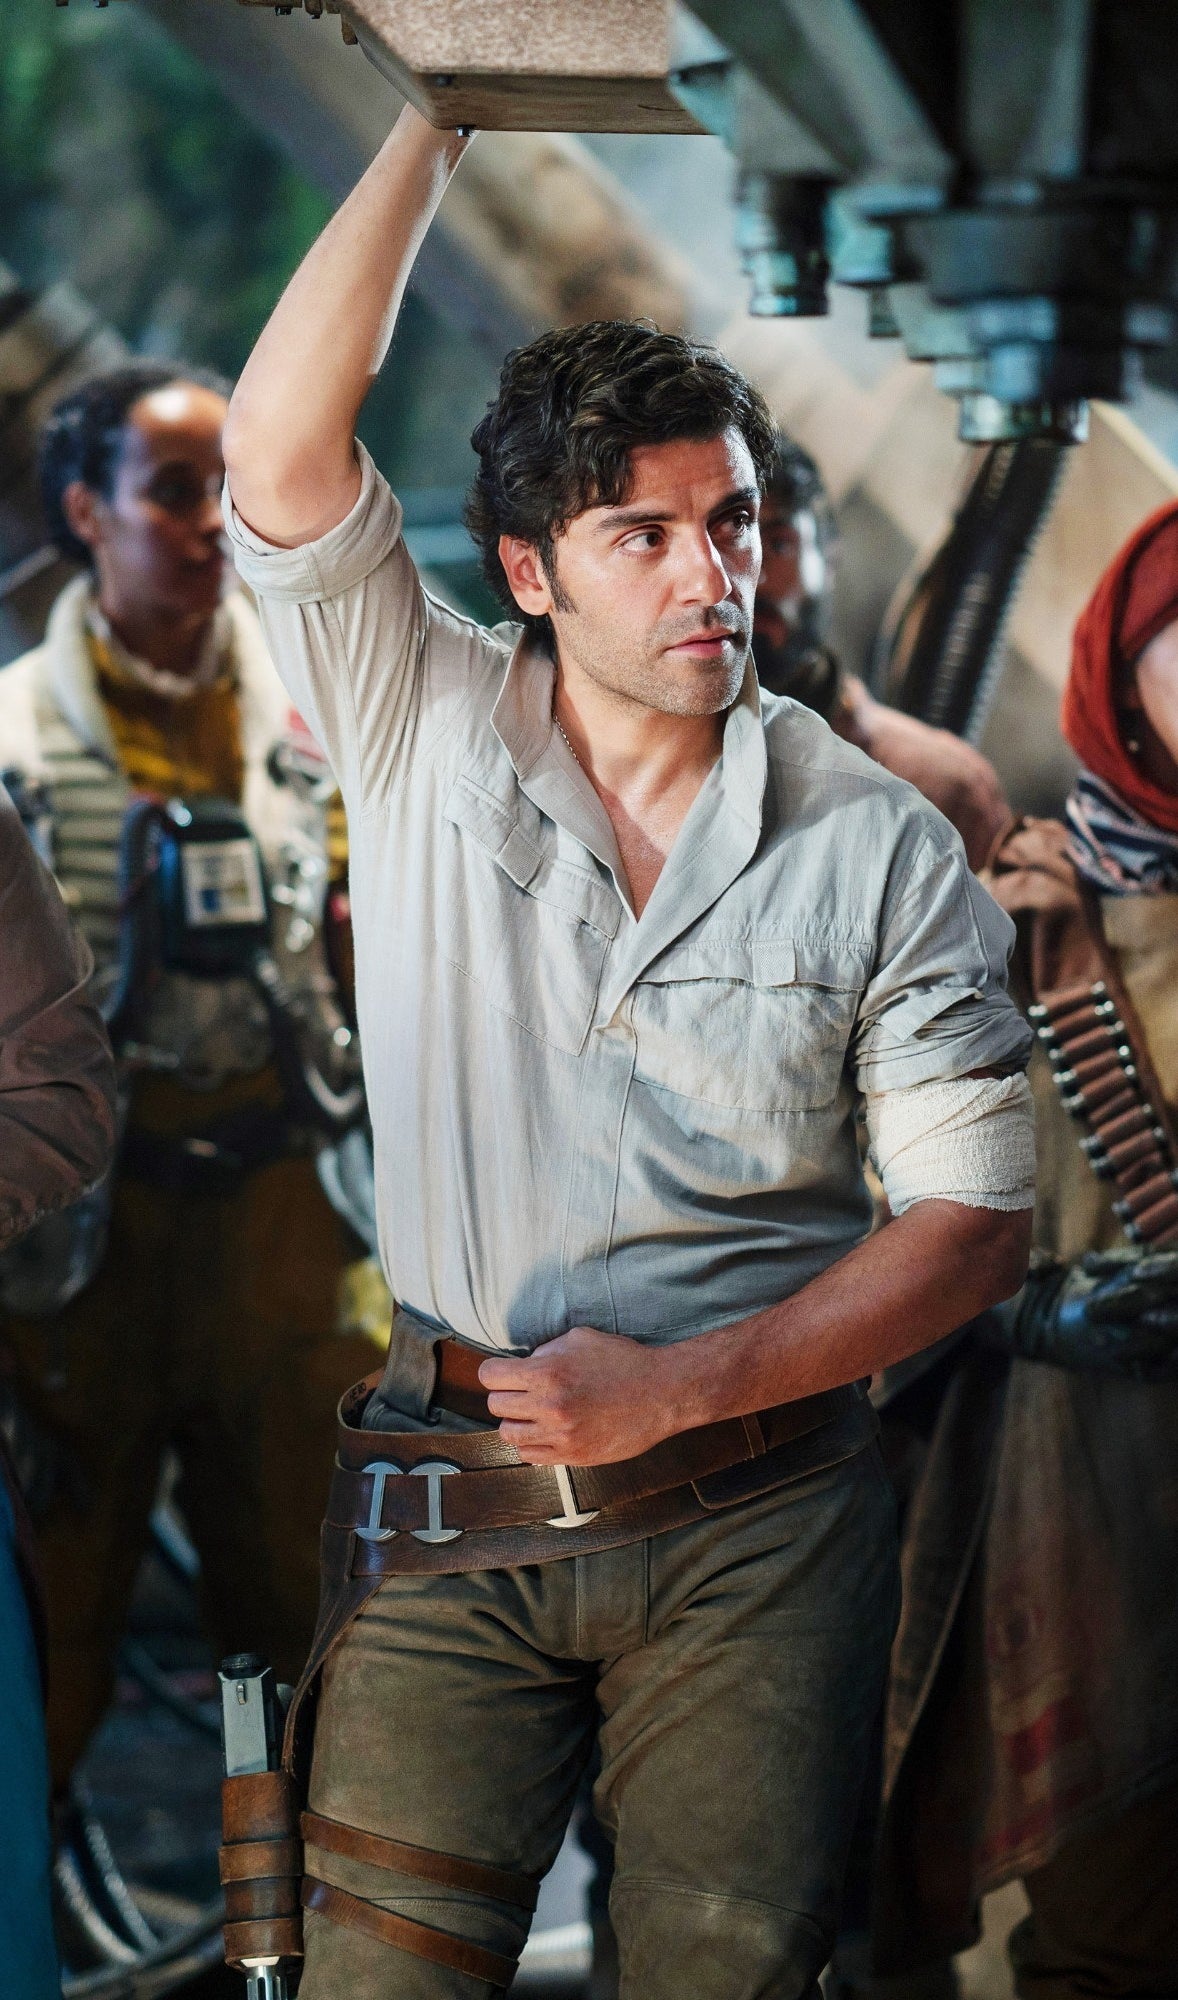 Oscar Isaac dressed as Poe Dameron on Star Wars set, arm up and leaning